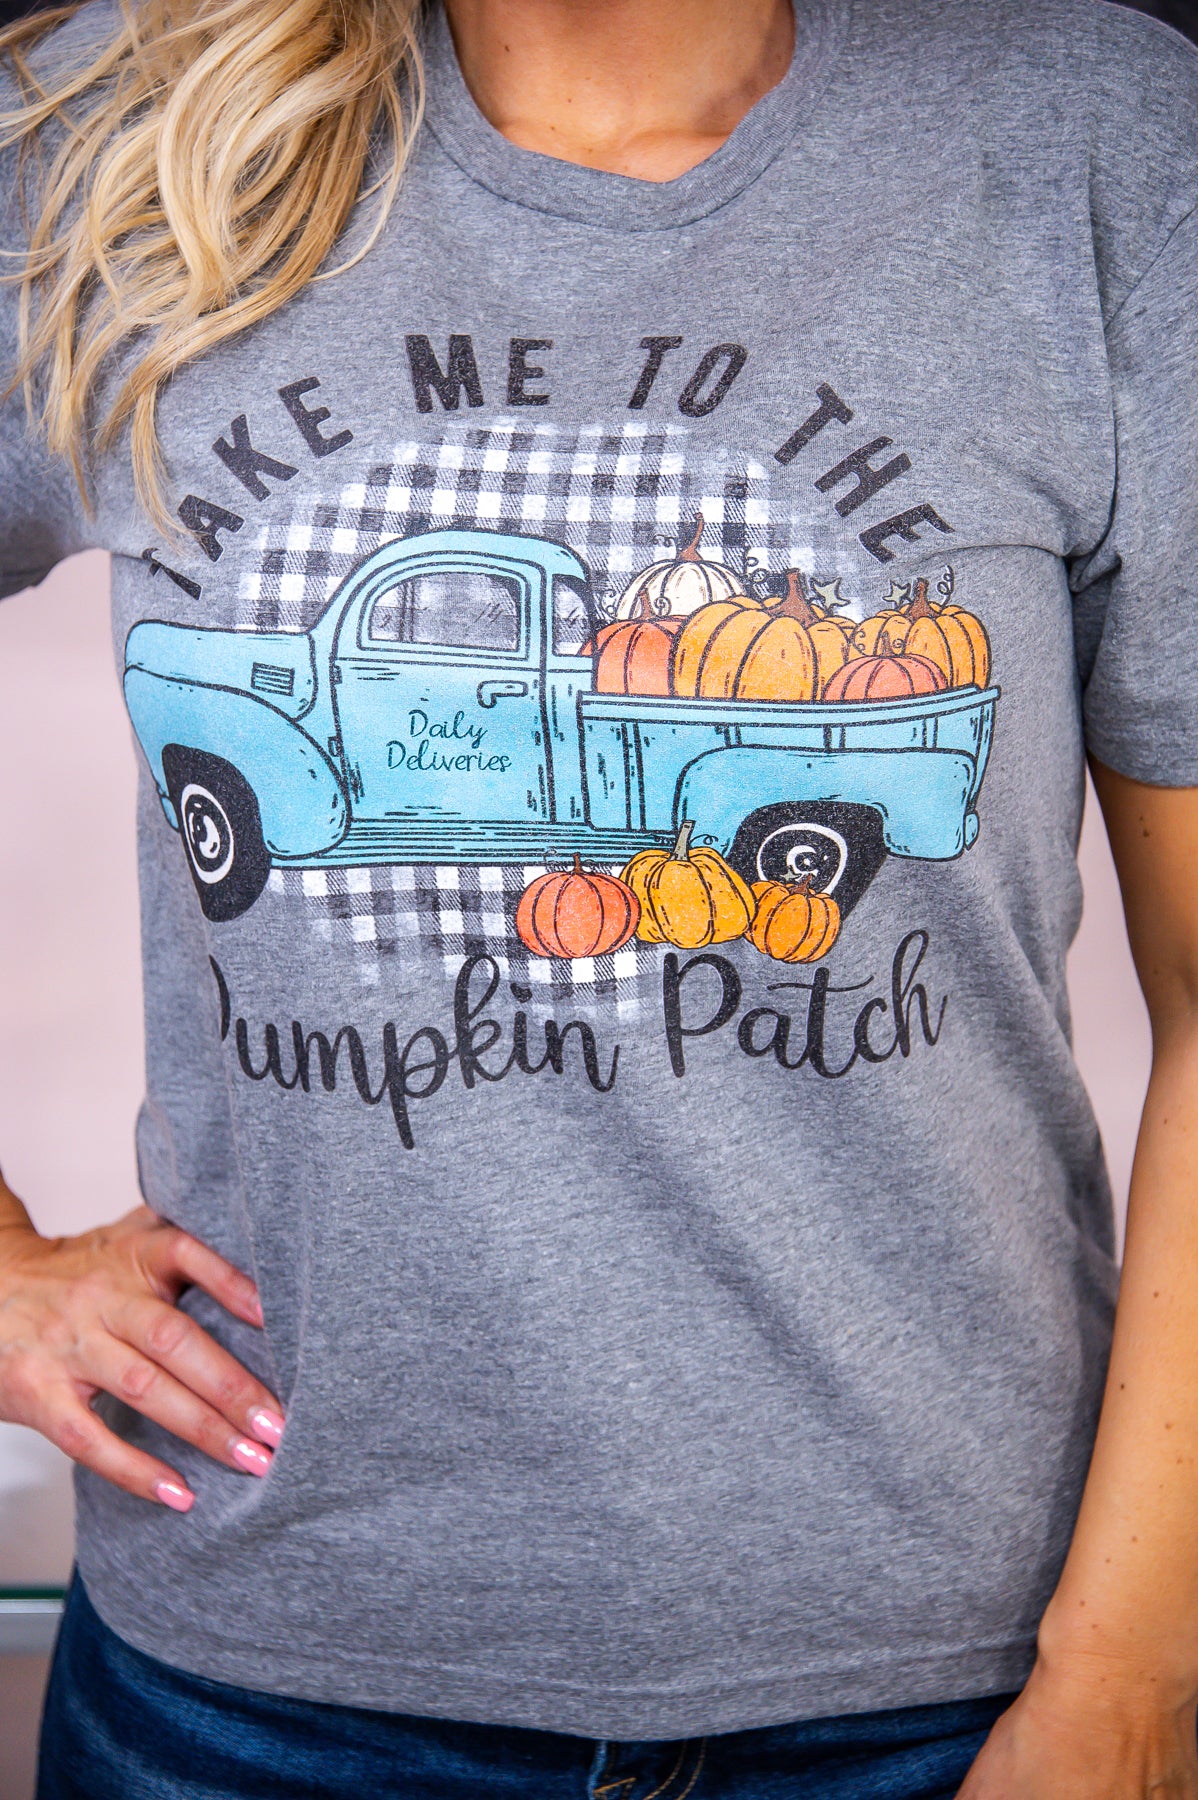 Take Me To The Pumpkin Patch Premium Heather Gray Graphic Tee - A2894PHG